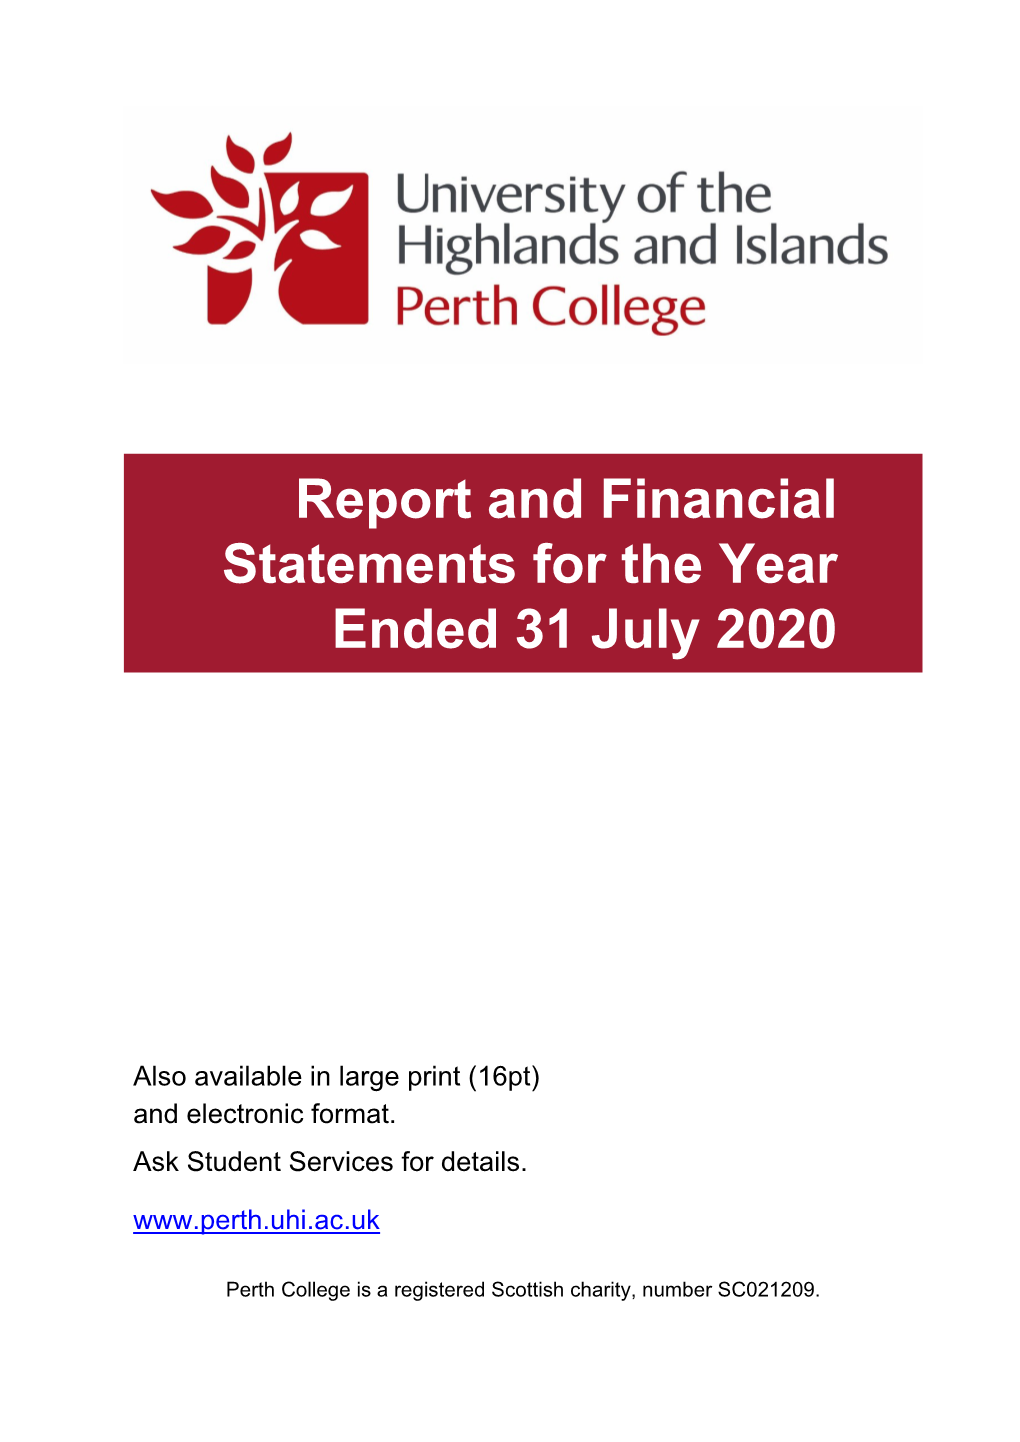 Report and Financial Statements for the Year Ended 31 July 2020